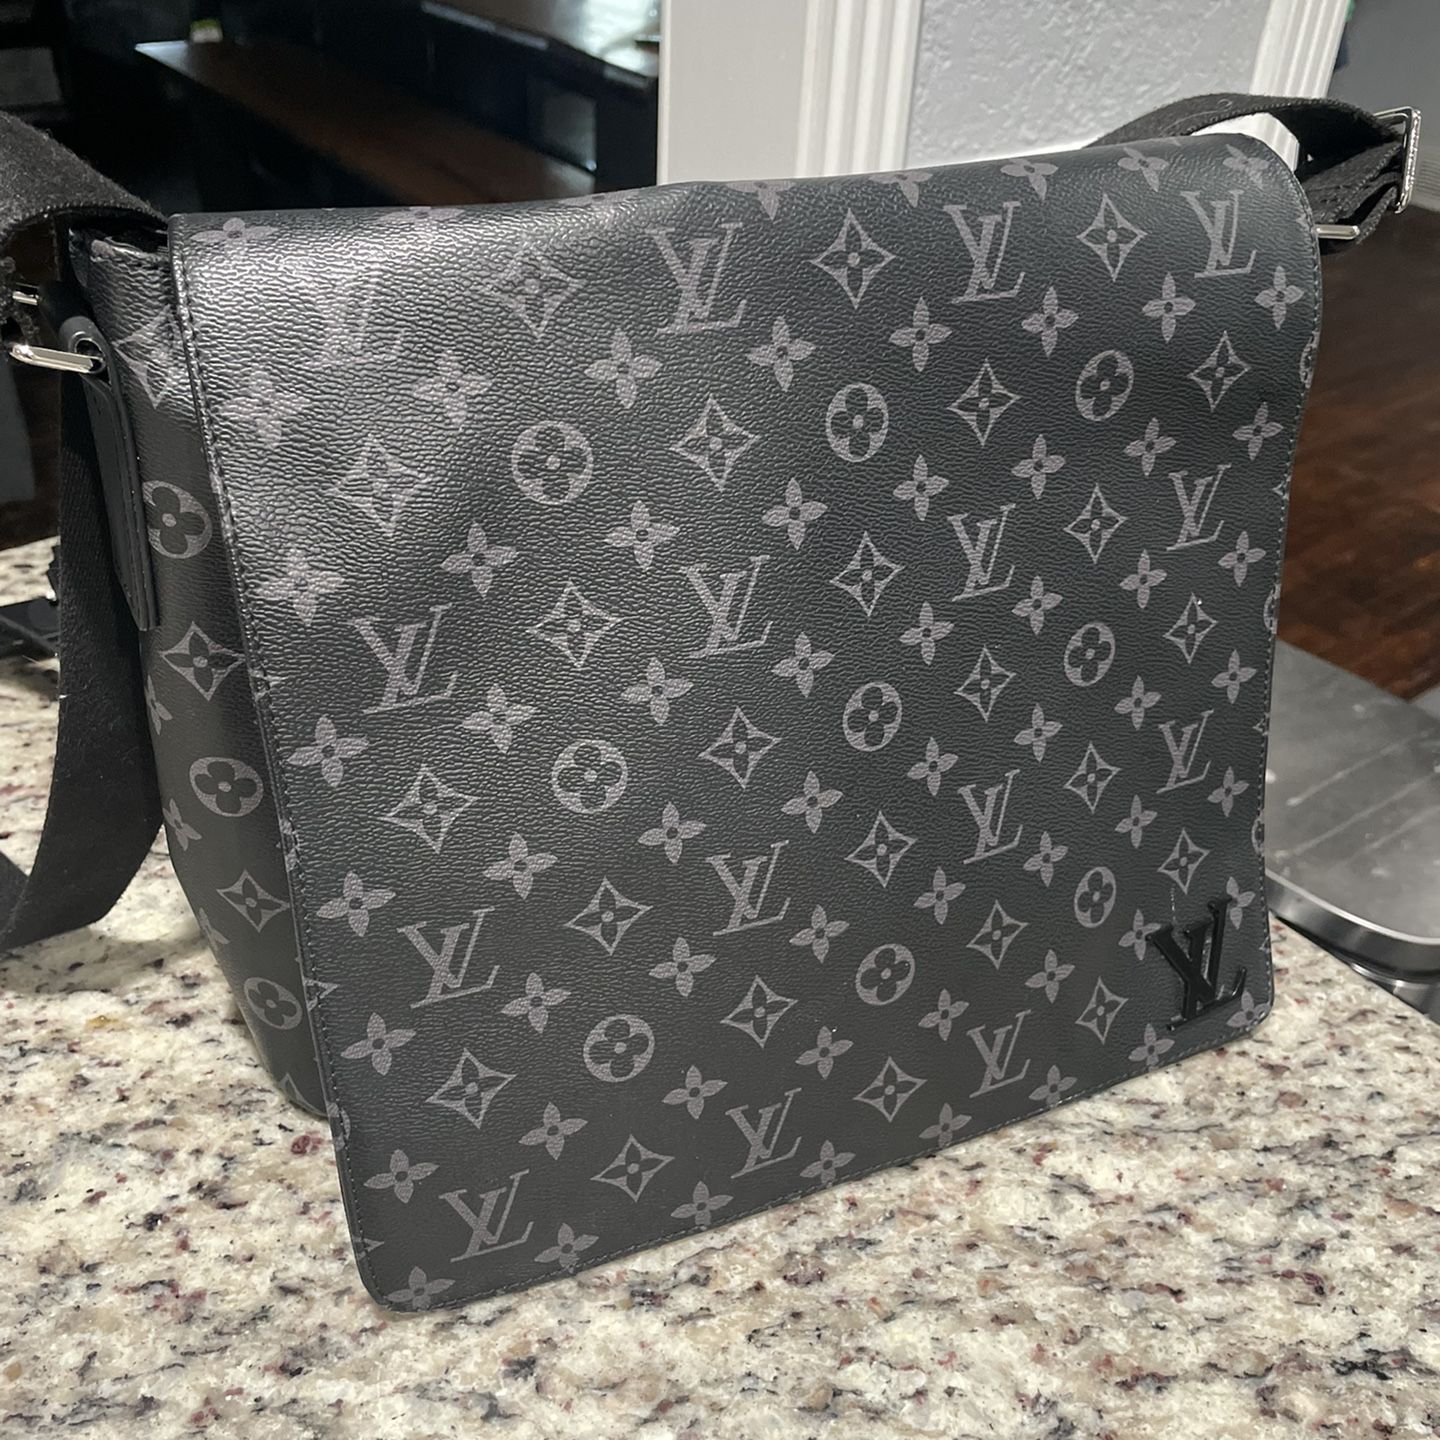 LV Computer Bag for Sale in Dallas, TX - OfferUp